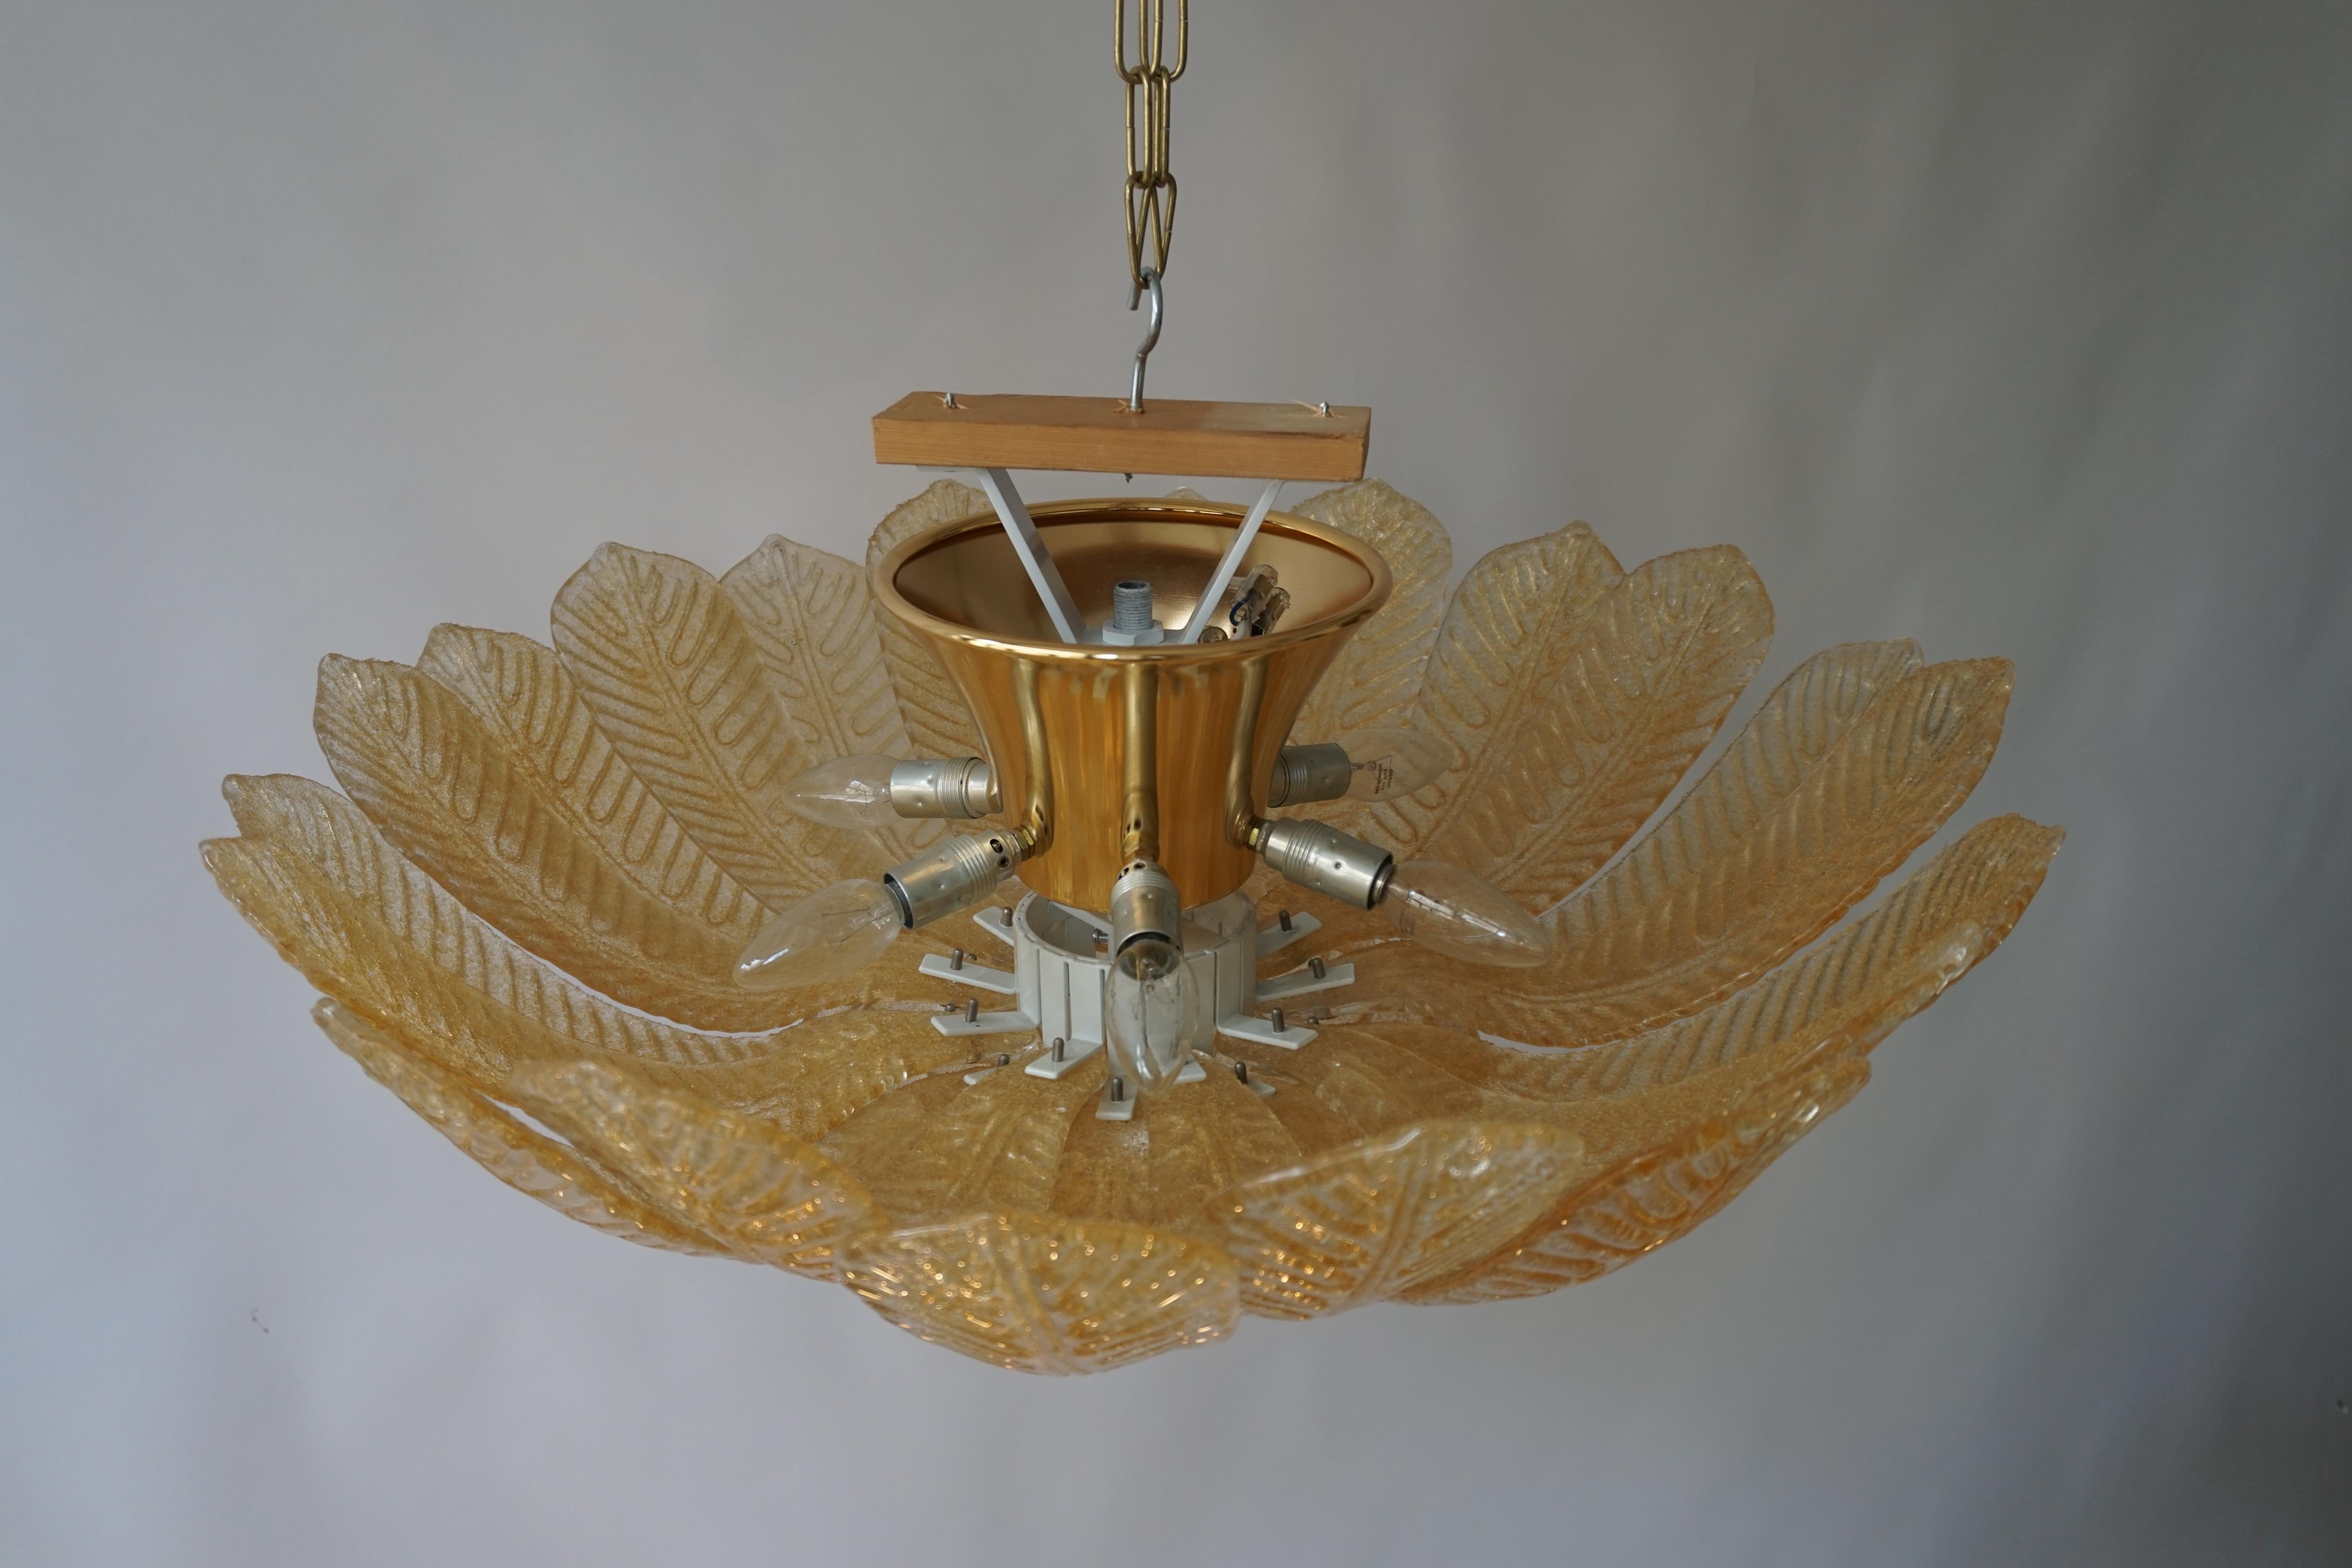 Barovier Toso Style Italian Gold Textured Murano Glass Flower Leaf Flushmount (anglais seulement) en vente 5